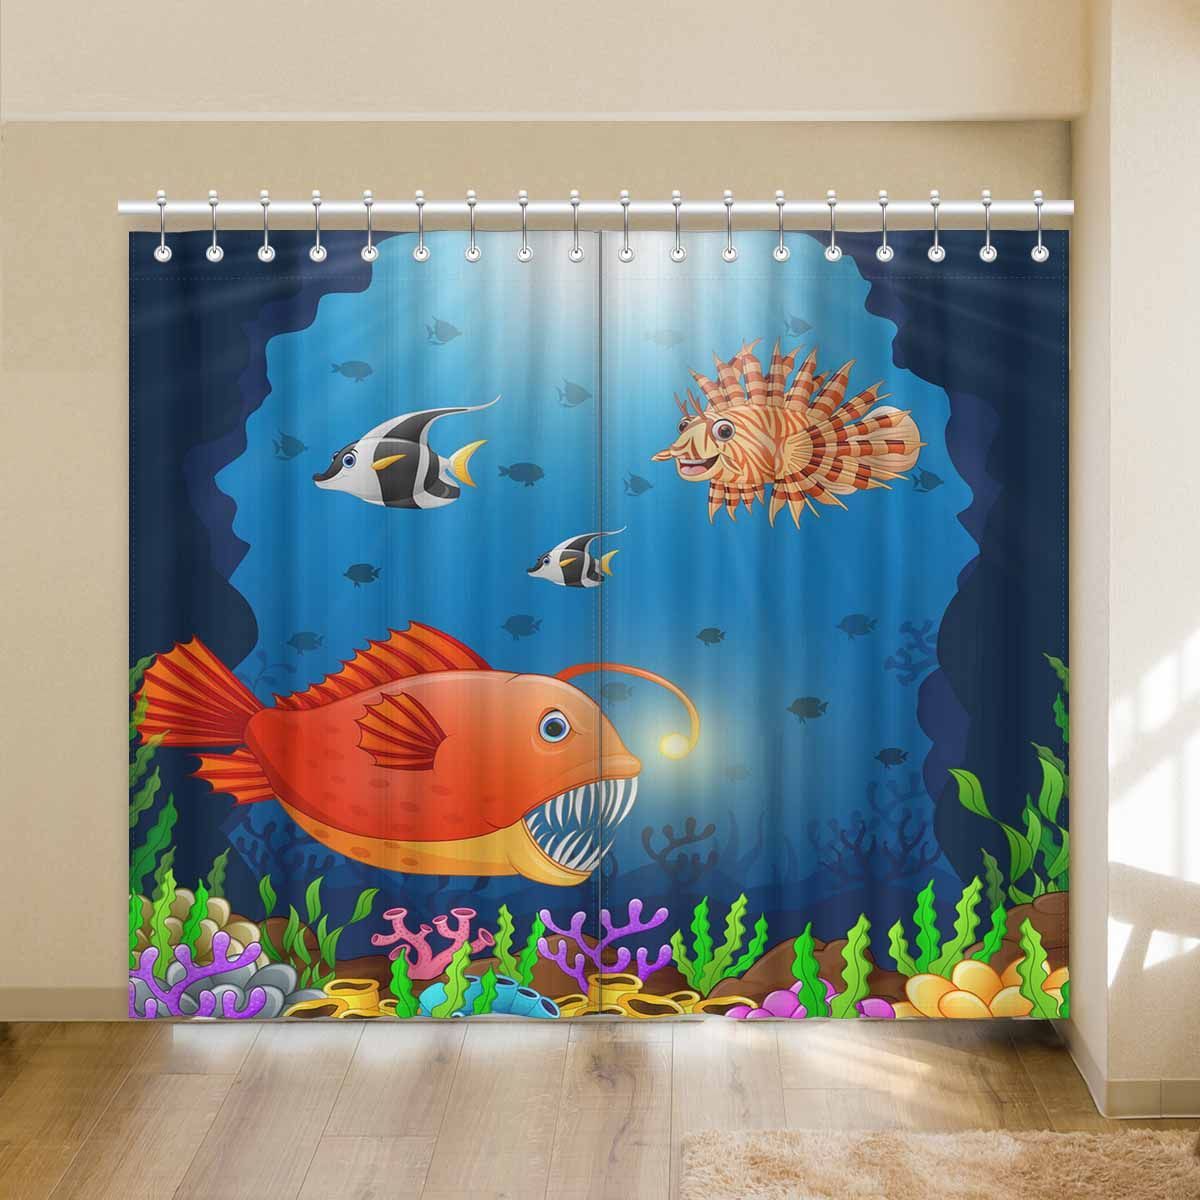 Colorful Coral And Orange Fish Printed Window Curtain